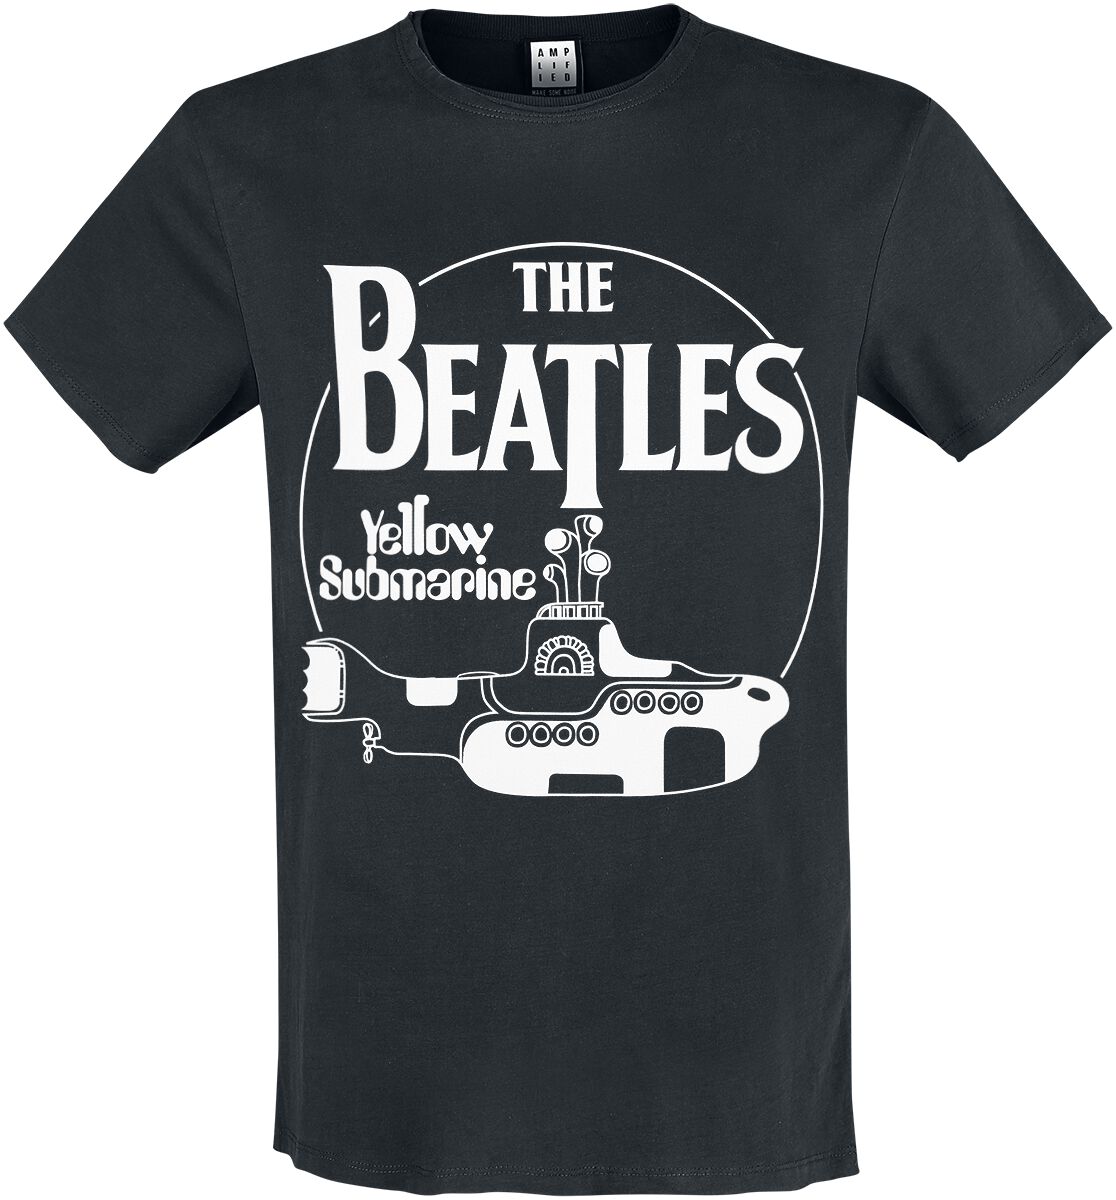 The Beatles Amplified Collection - Yellow Sub 2 T-Shirt black